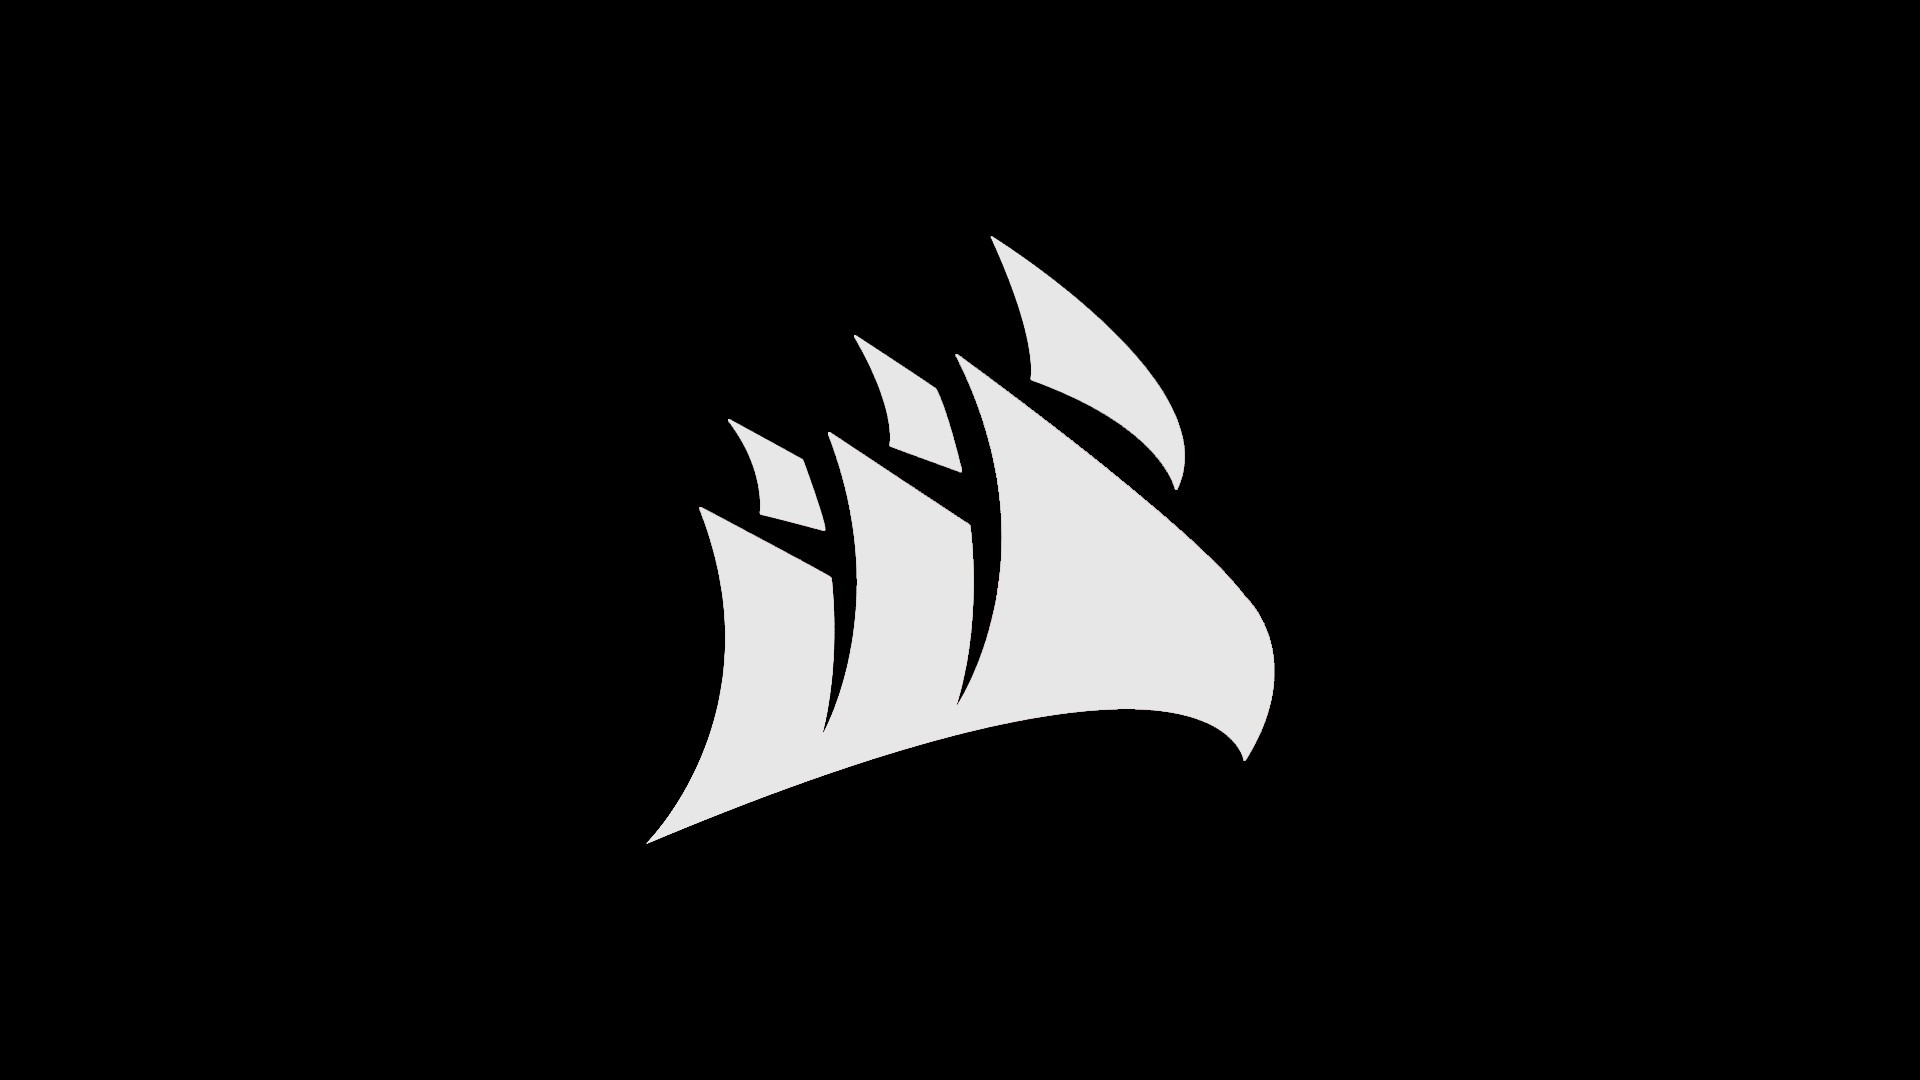 Corsair Pc Gaming Minimalism Monochrome Wallpapers Hd Desktop And Mobile Backgrounds